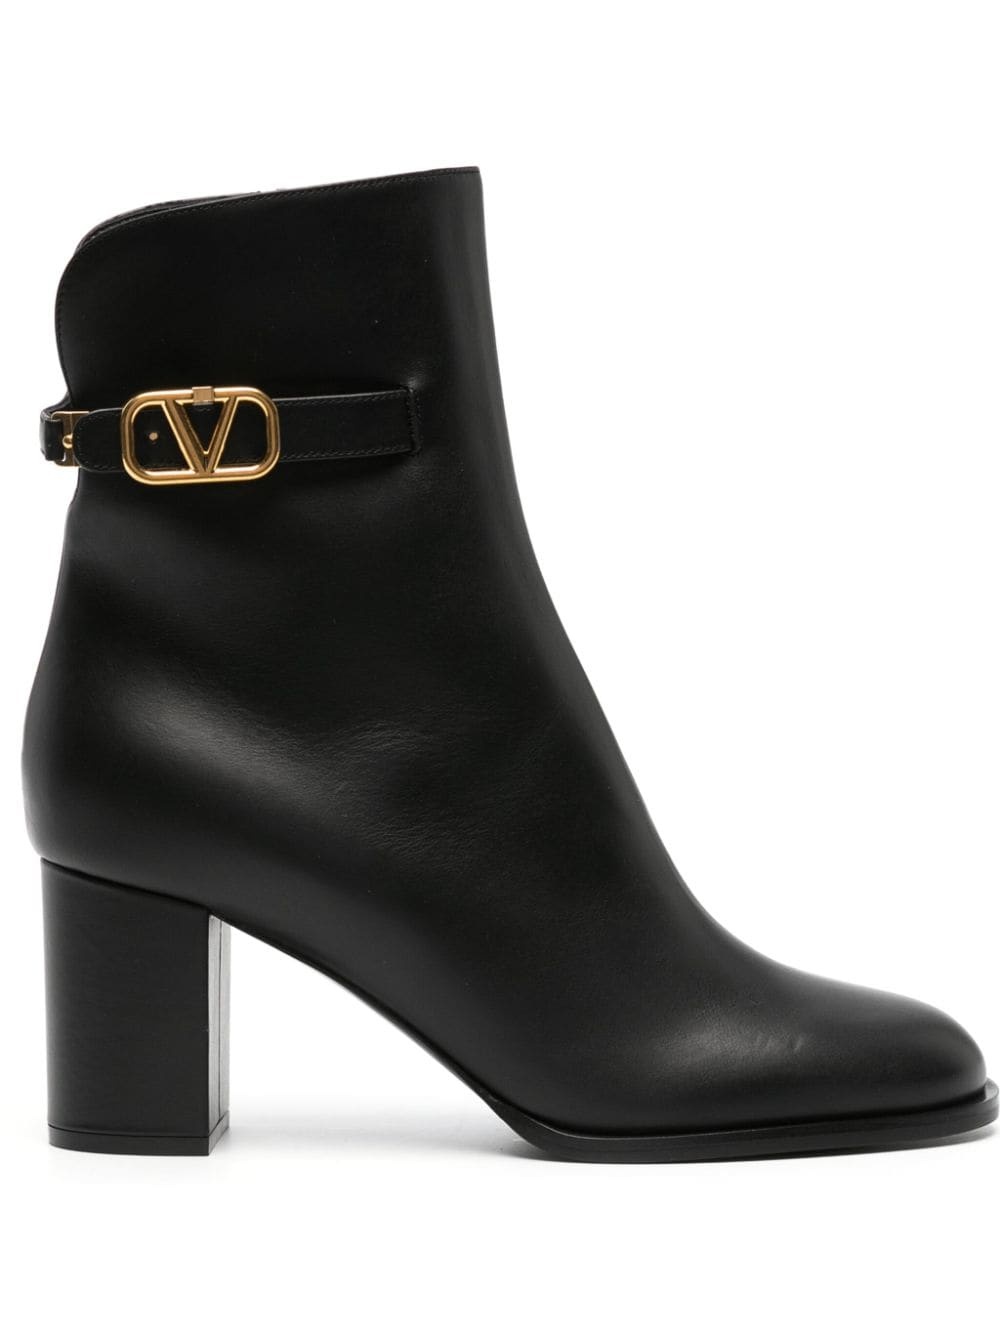 VLogo Signature 70mm leather boots - 1